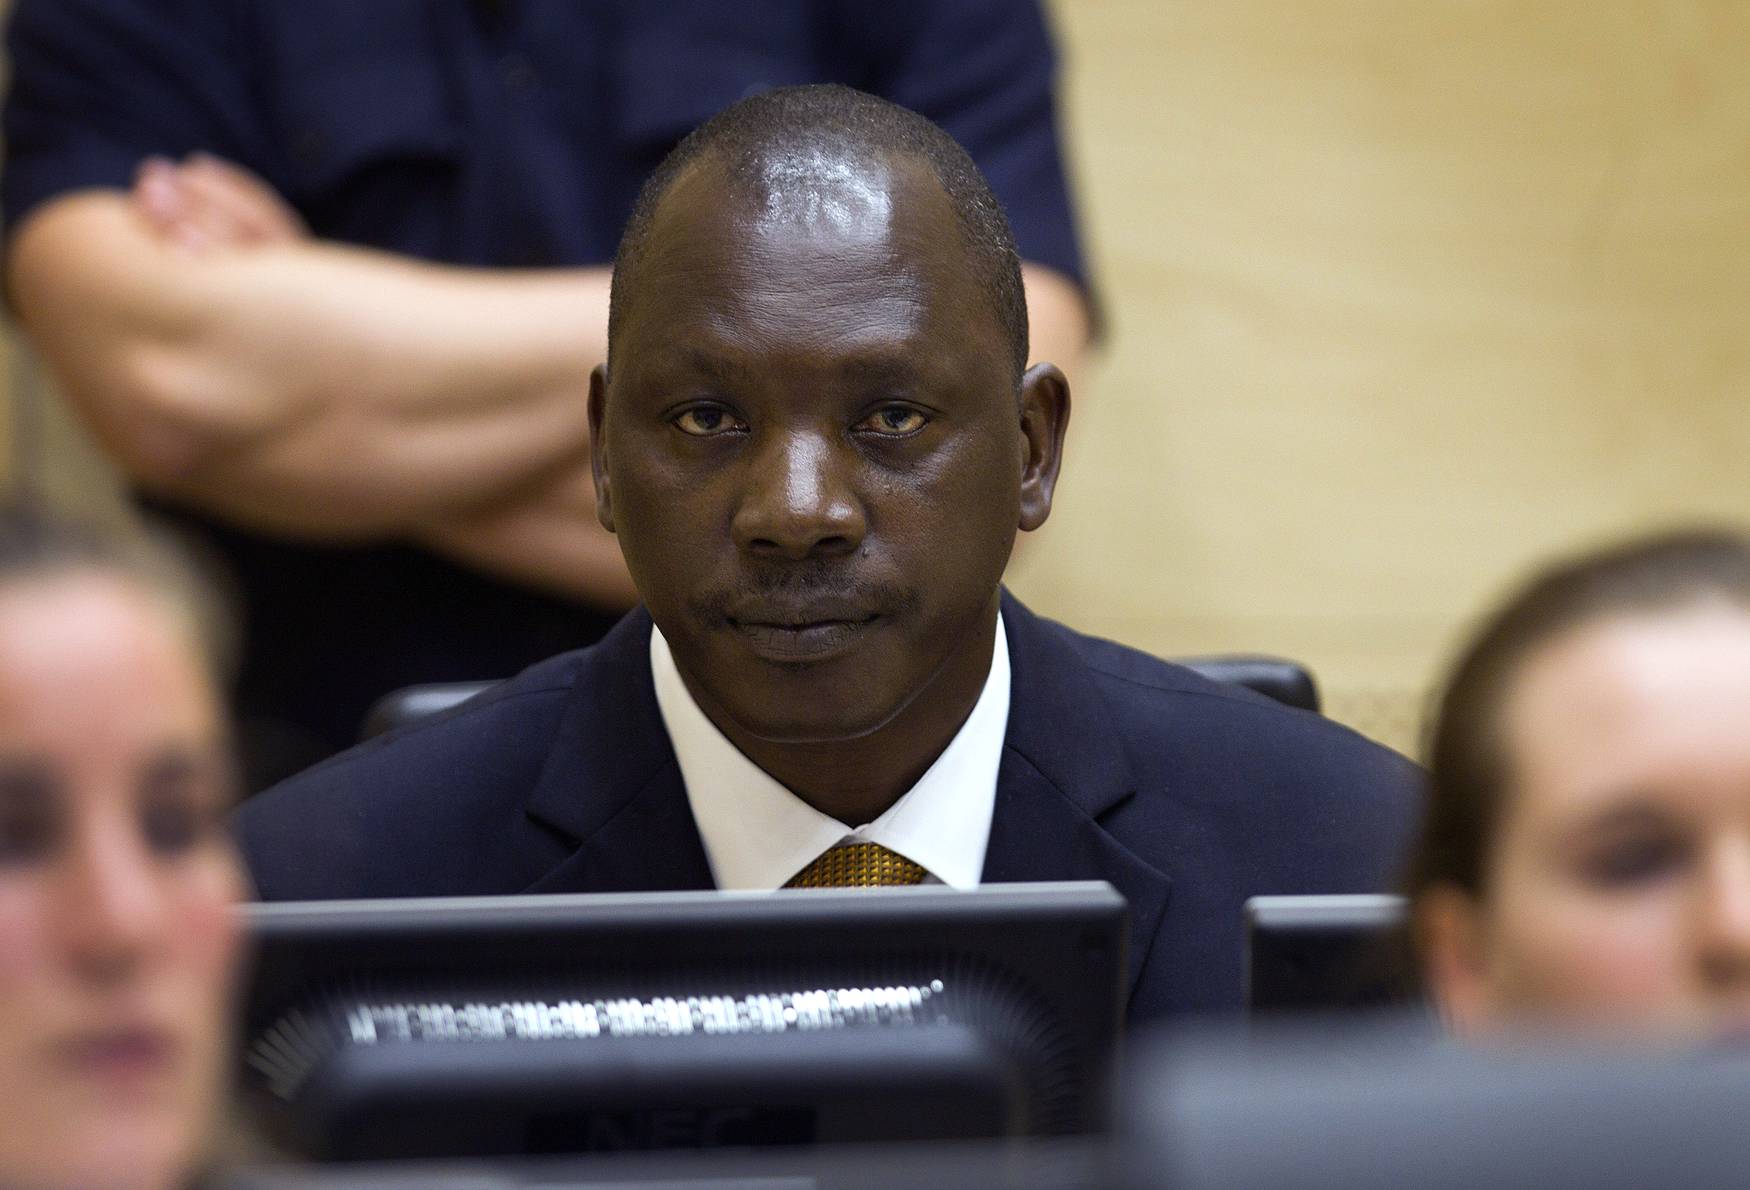 Congolese Warlord Thomas Lubanga to Serve 14 Years for War Crimes - The International Criminal Court found Congolese warlord Thomas Lubanga guilty of war crimes for using child soldiers under age 15 and forcing them to participate in a civil war in the Democratic Republic of the Congo. He was slapped with a jail term of 14 years for the crime.&nbsp; (Photo: MICHAEL KOOREN /LANDOV/REUTERS)